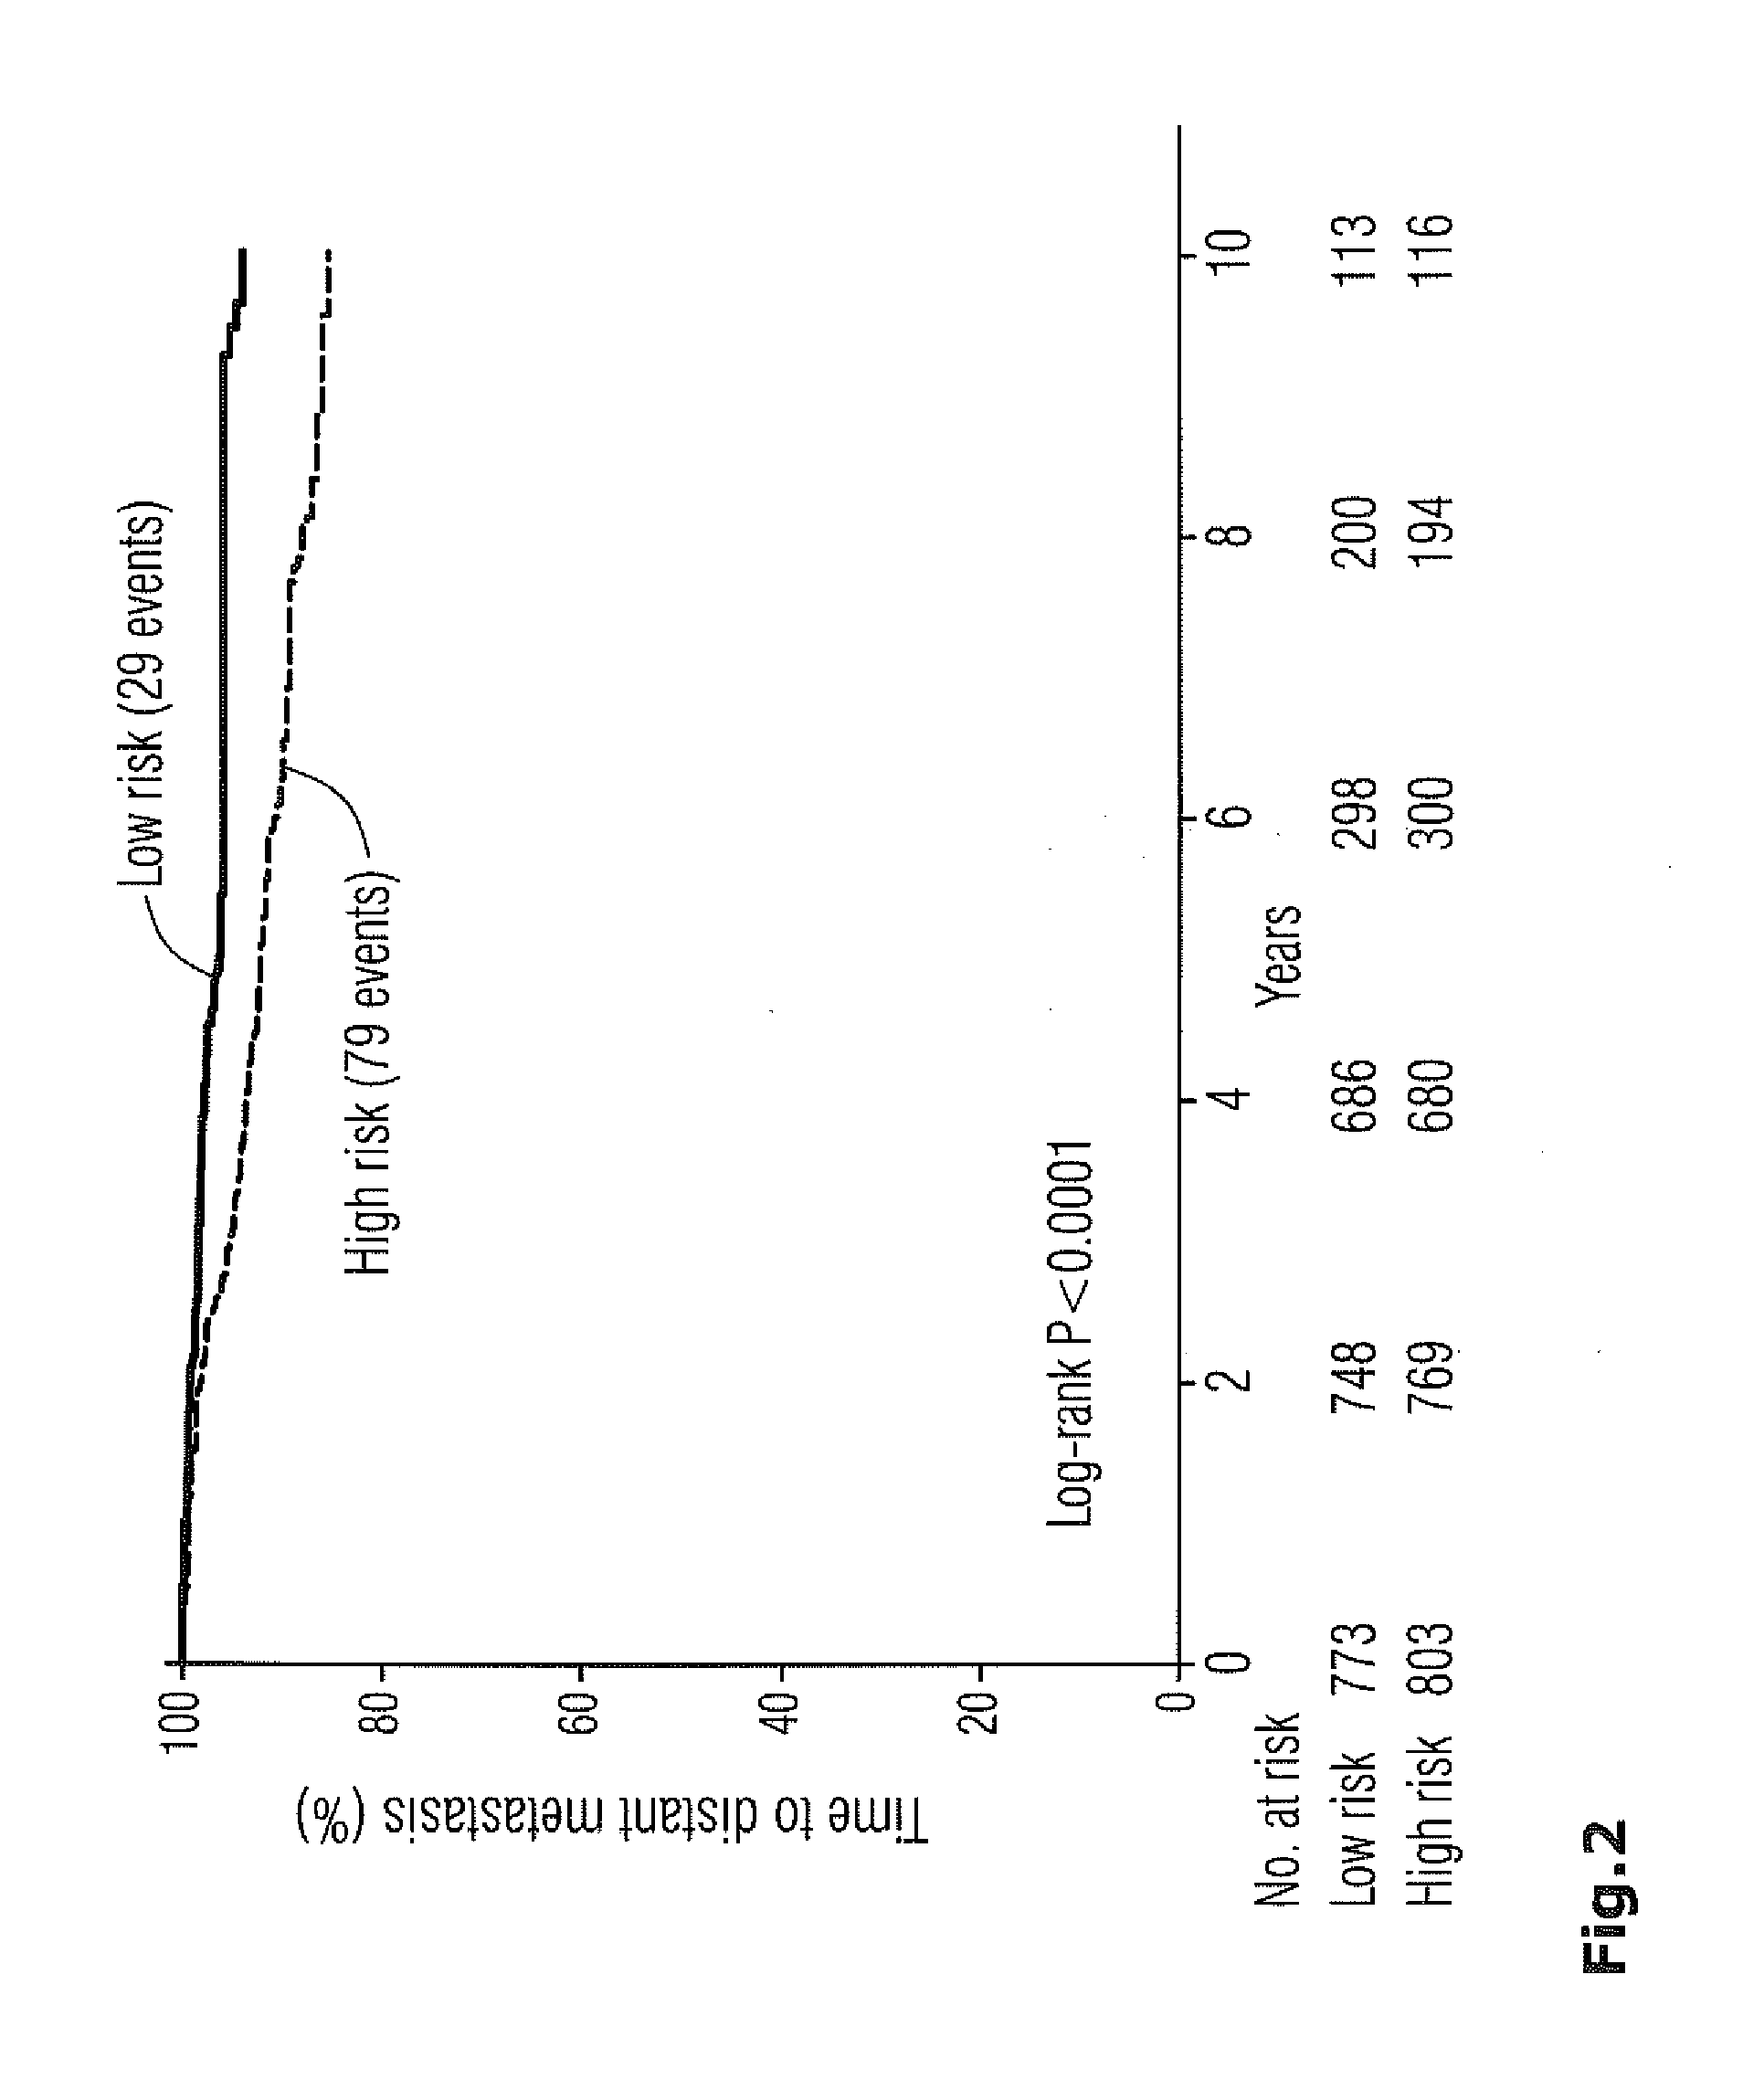 Method for breast cancer recurrence prediction under endocrine treatment